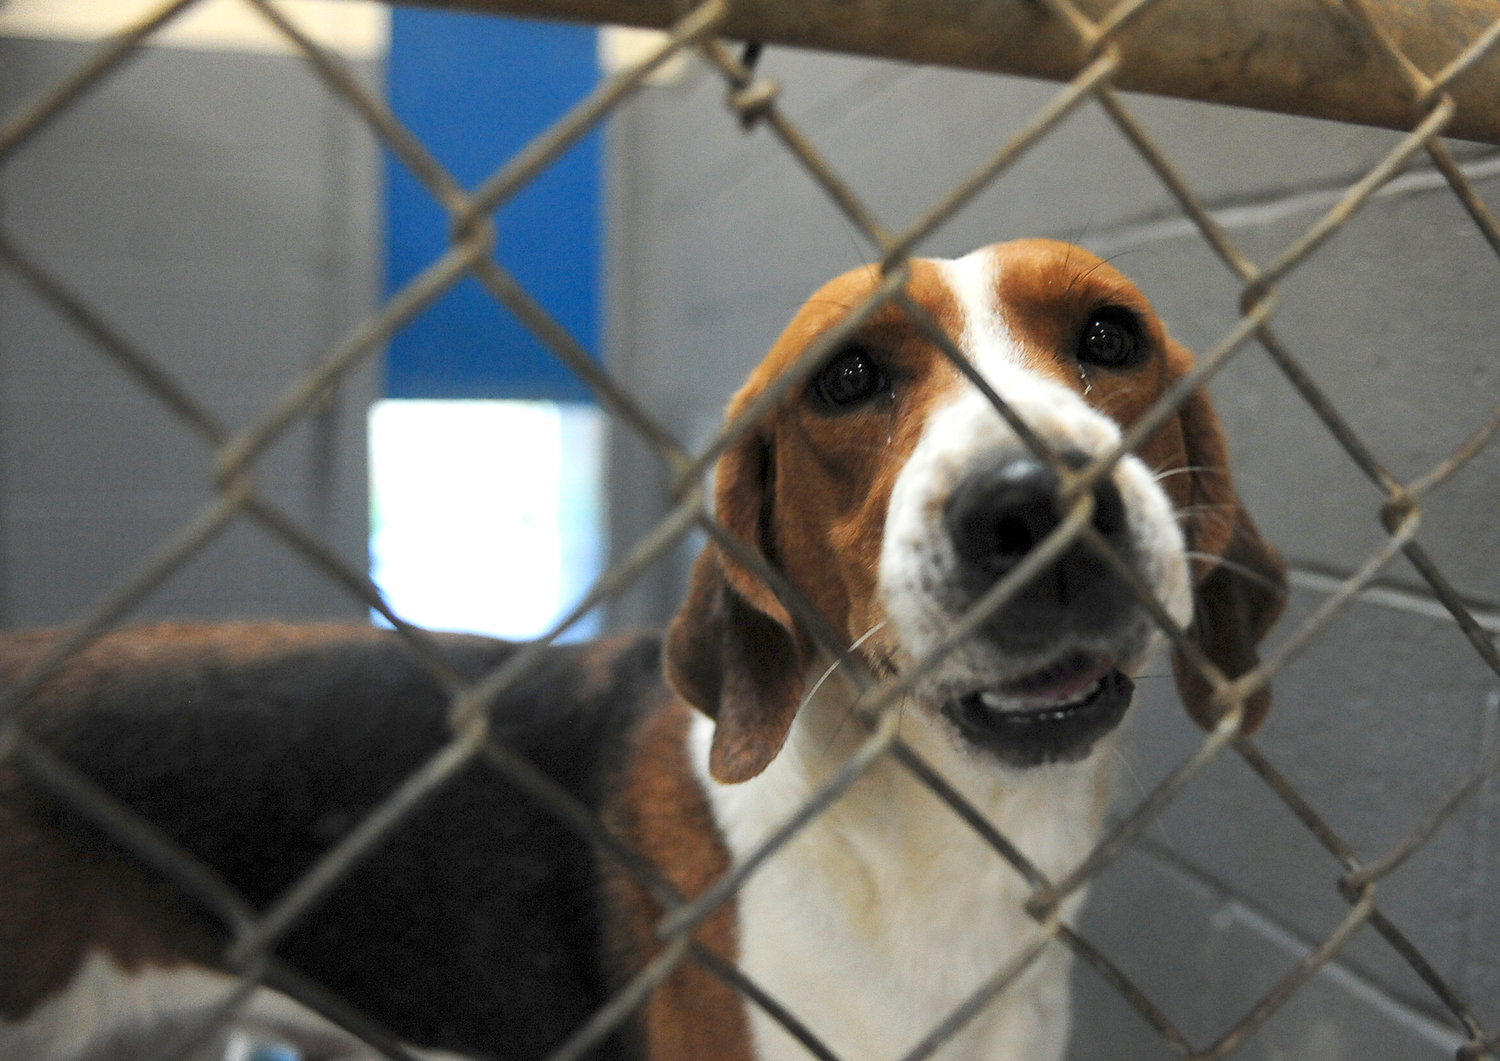 Star, a 3 1/2-year-old fox hound, stares out from his kennel in this file photo.